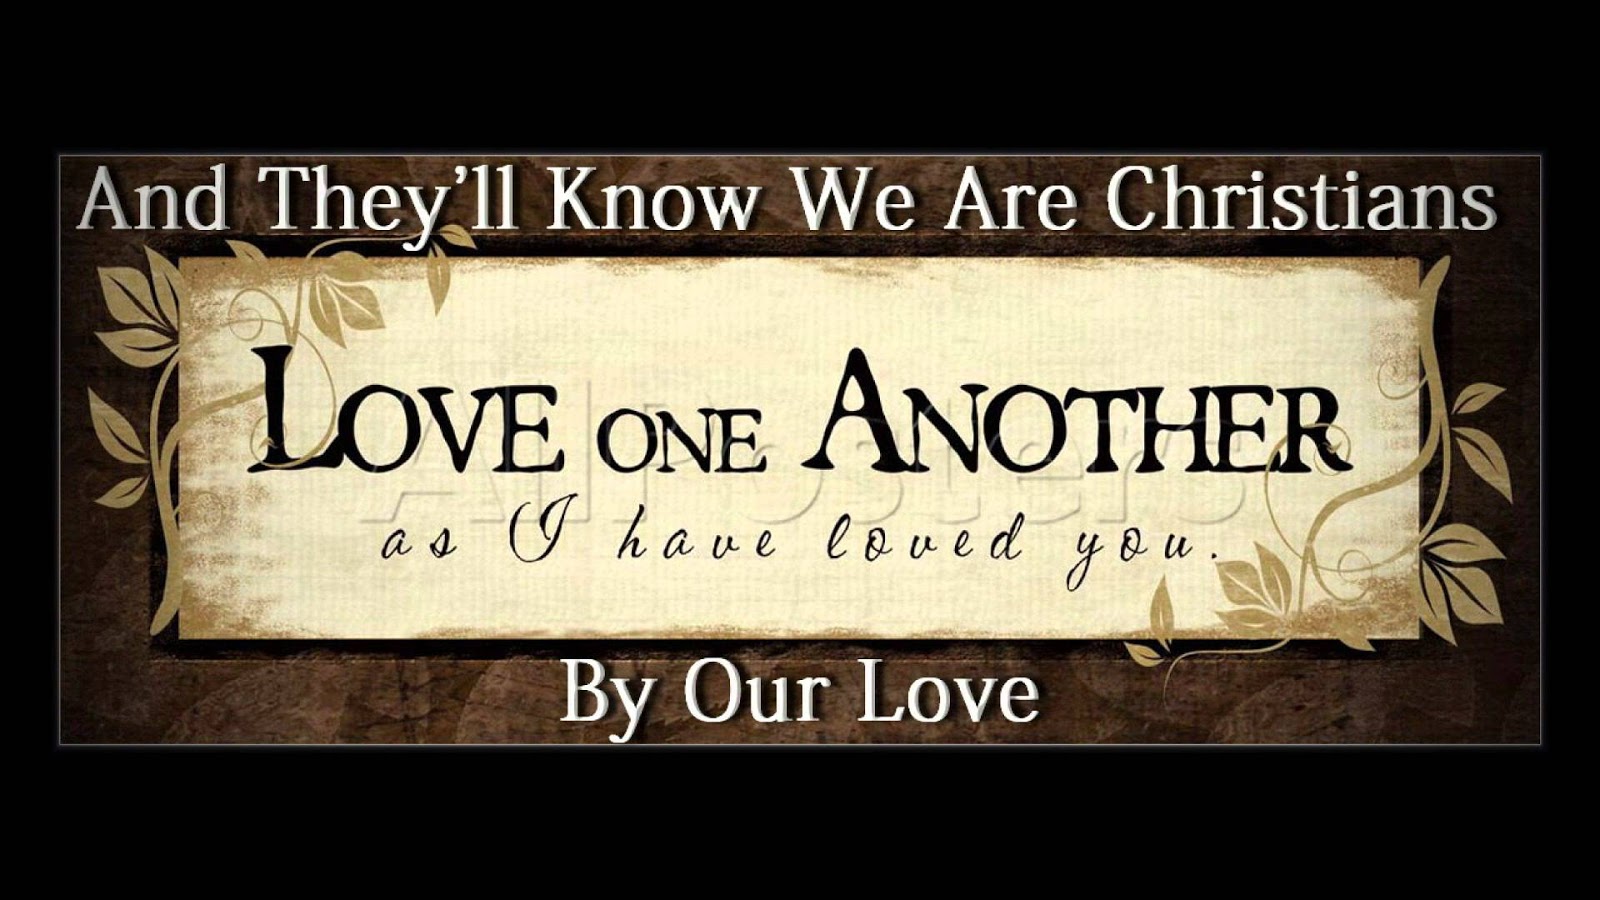 One of them and another one. Love one another. They know that we know they know we know. We are know. Love one another Jesus.